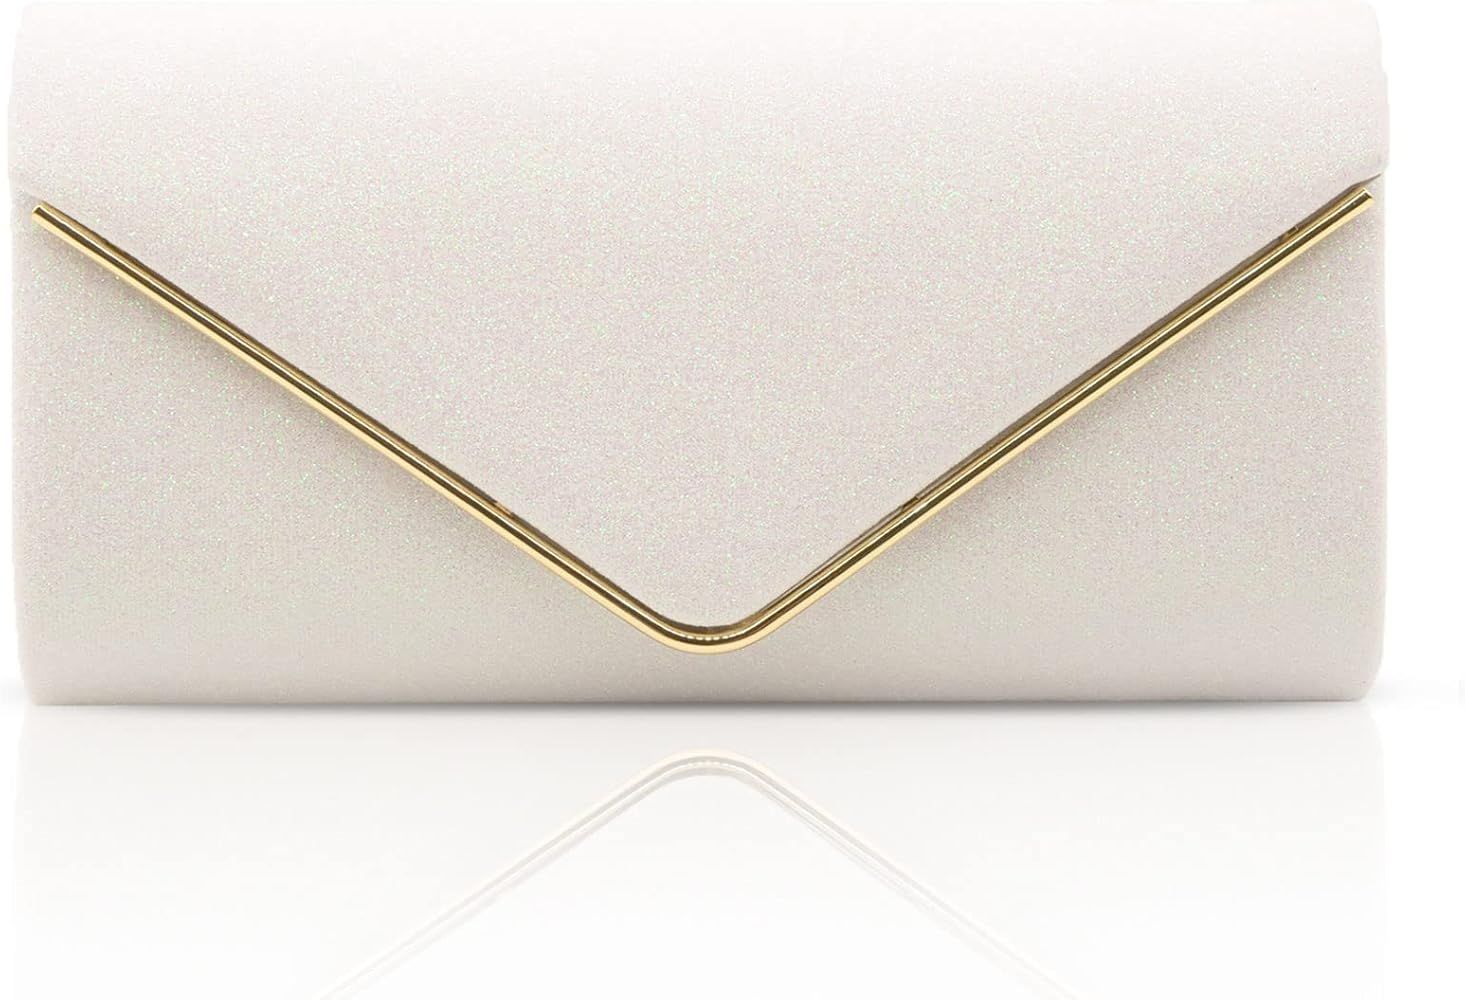 Labair Shining Envelope Clutch Purses for Women Evening Purses and Clutches For Wedding Party. | Amazon (US)